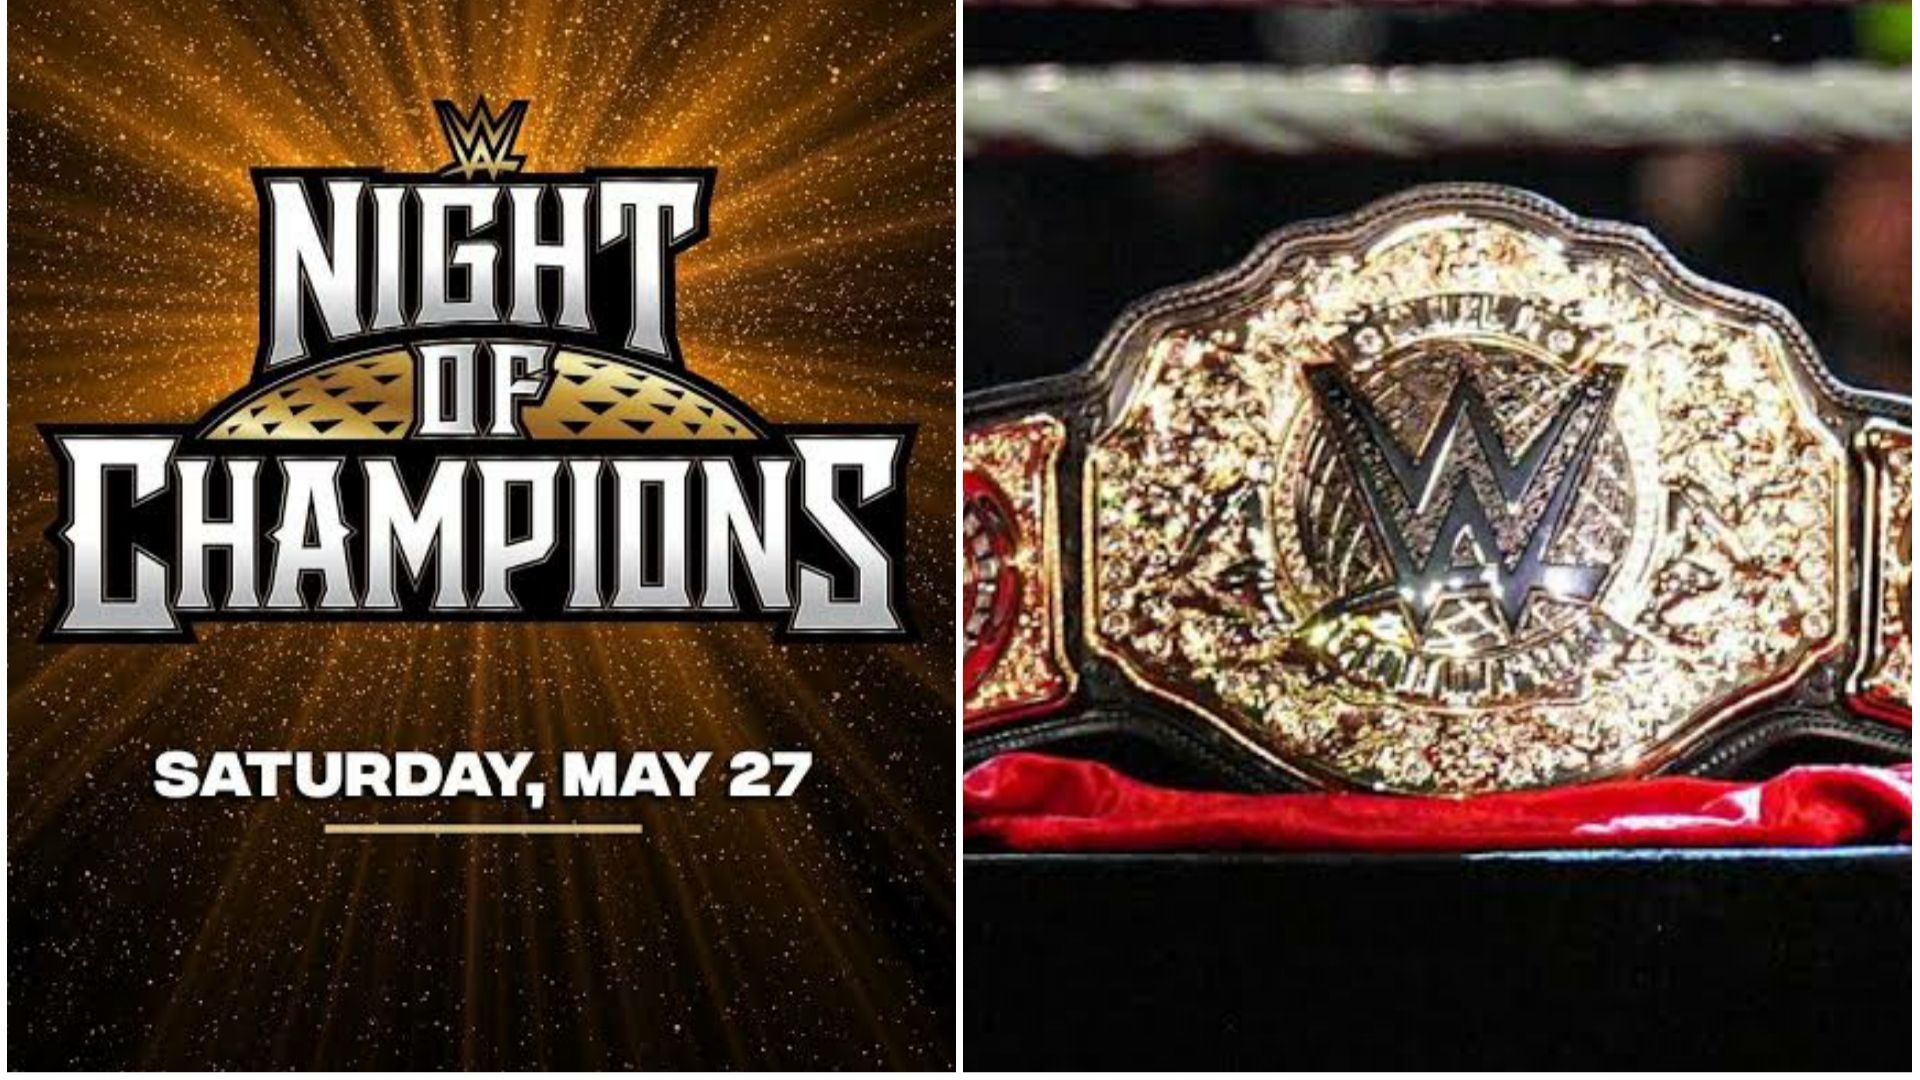 The Stamford-based company will crown its new World Heavyweight Champion at WWE Night of Champions.